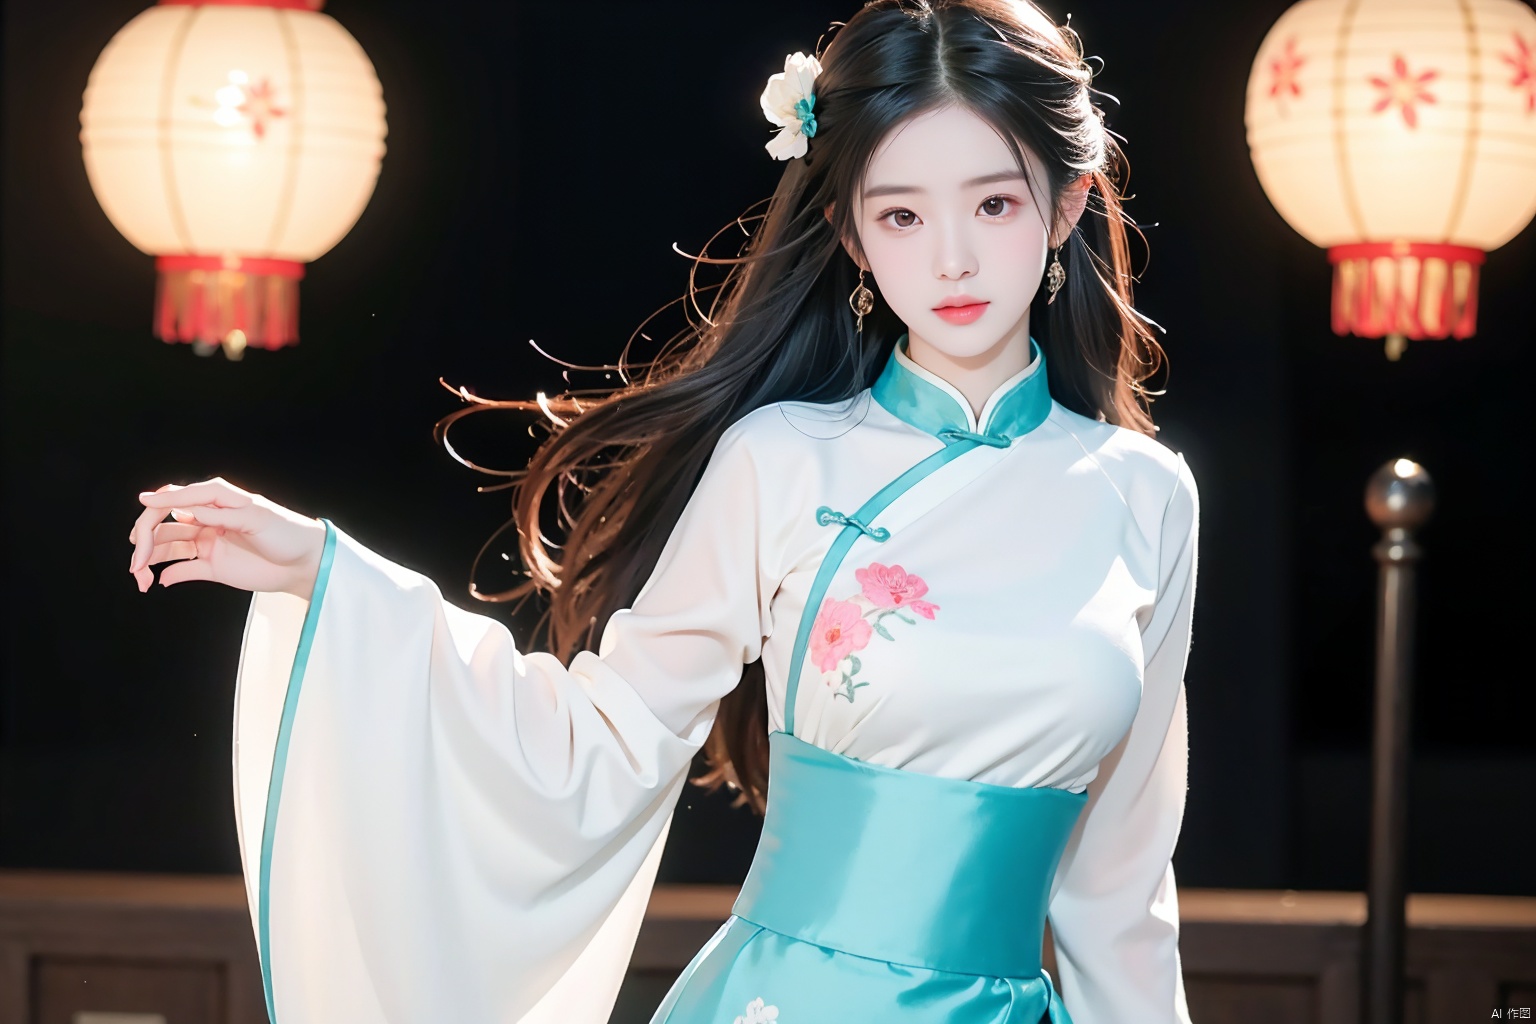  Premium, masterpiece, high-resolution, (exquisite figure: 1.5), stunning appearance, (milky white skin: 1.3). Exquisite details, high-resolution, wallpaper, 1 girl, solo, turquoise blue Hanfu, embroidery, (qipao long skirt), hair accessories, flowers, long hair, brown hair, shut up, accessories, long sleeves, wide sleeves, big eyes, flowing hair, natural posture, falling petals, indoor, lanterns, bright and cheerful lighting, sunlight shining on the face of the subject. 16K, HDR, high resolution, depth of field, upper body, (film grain: 1.2),
